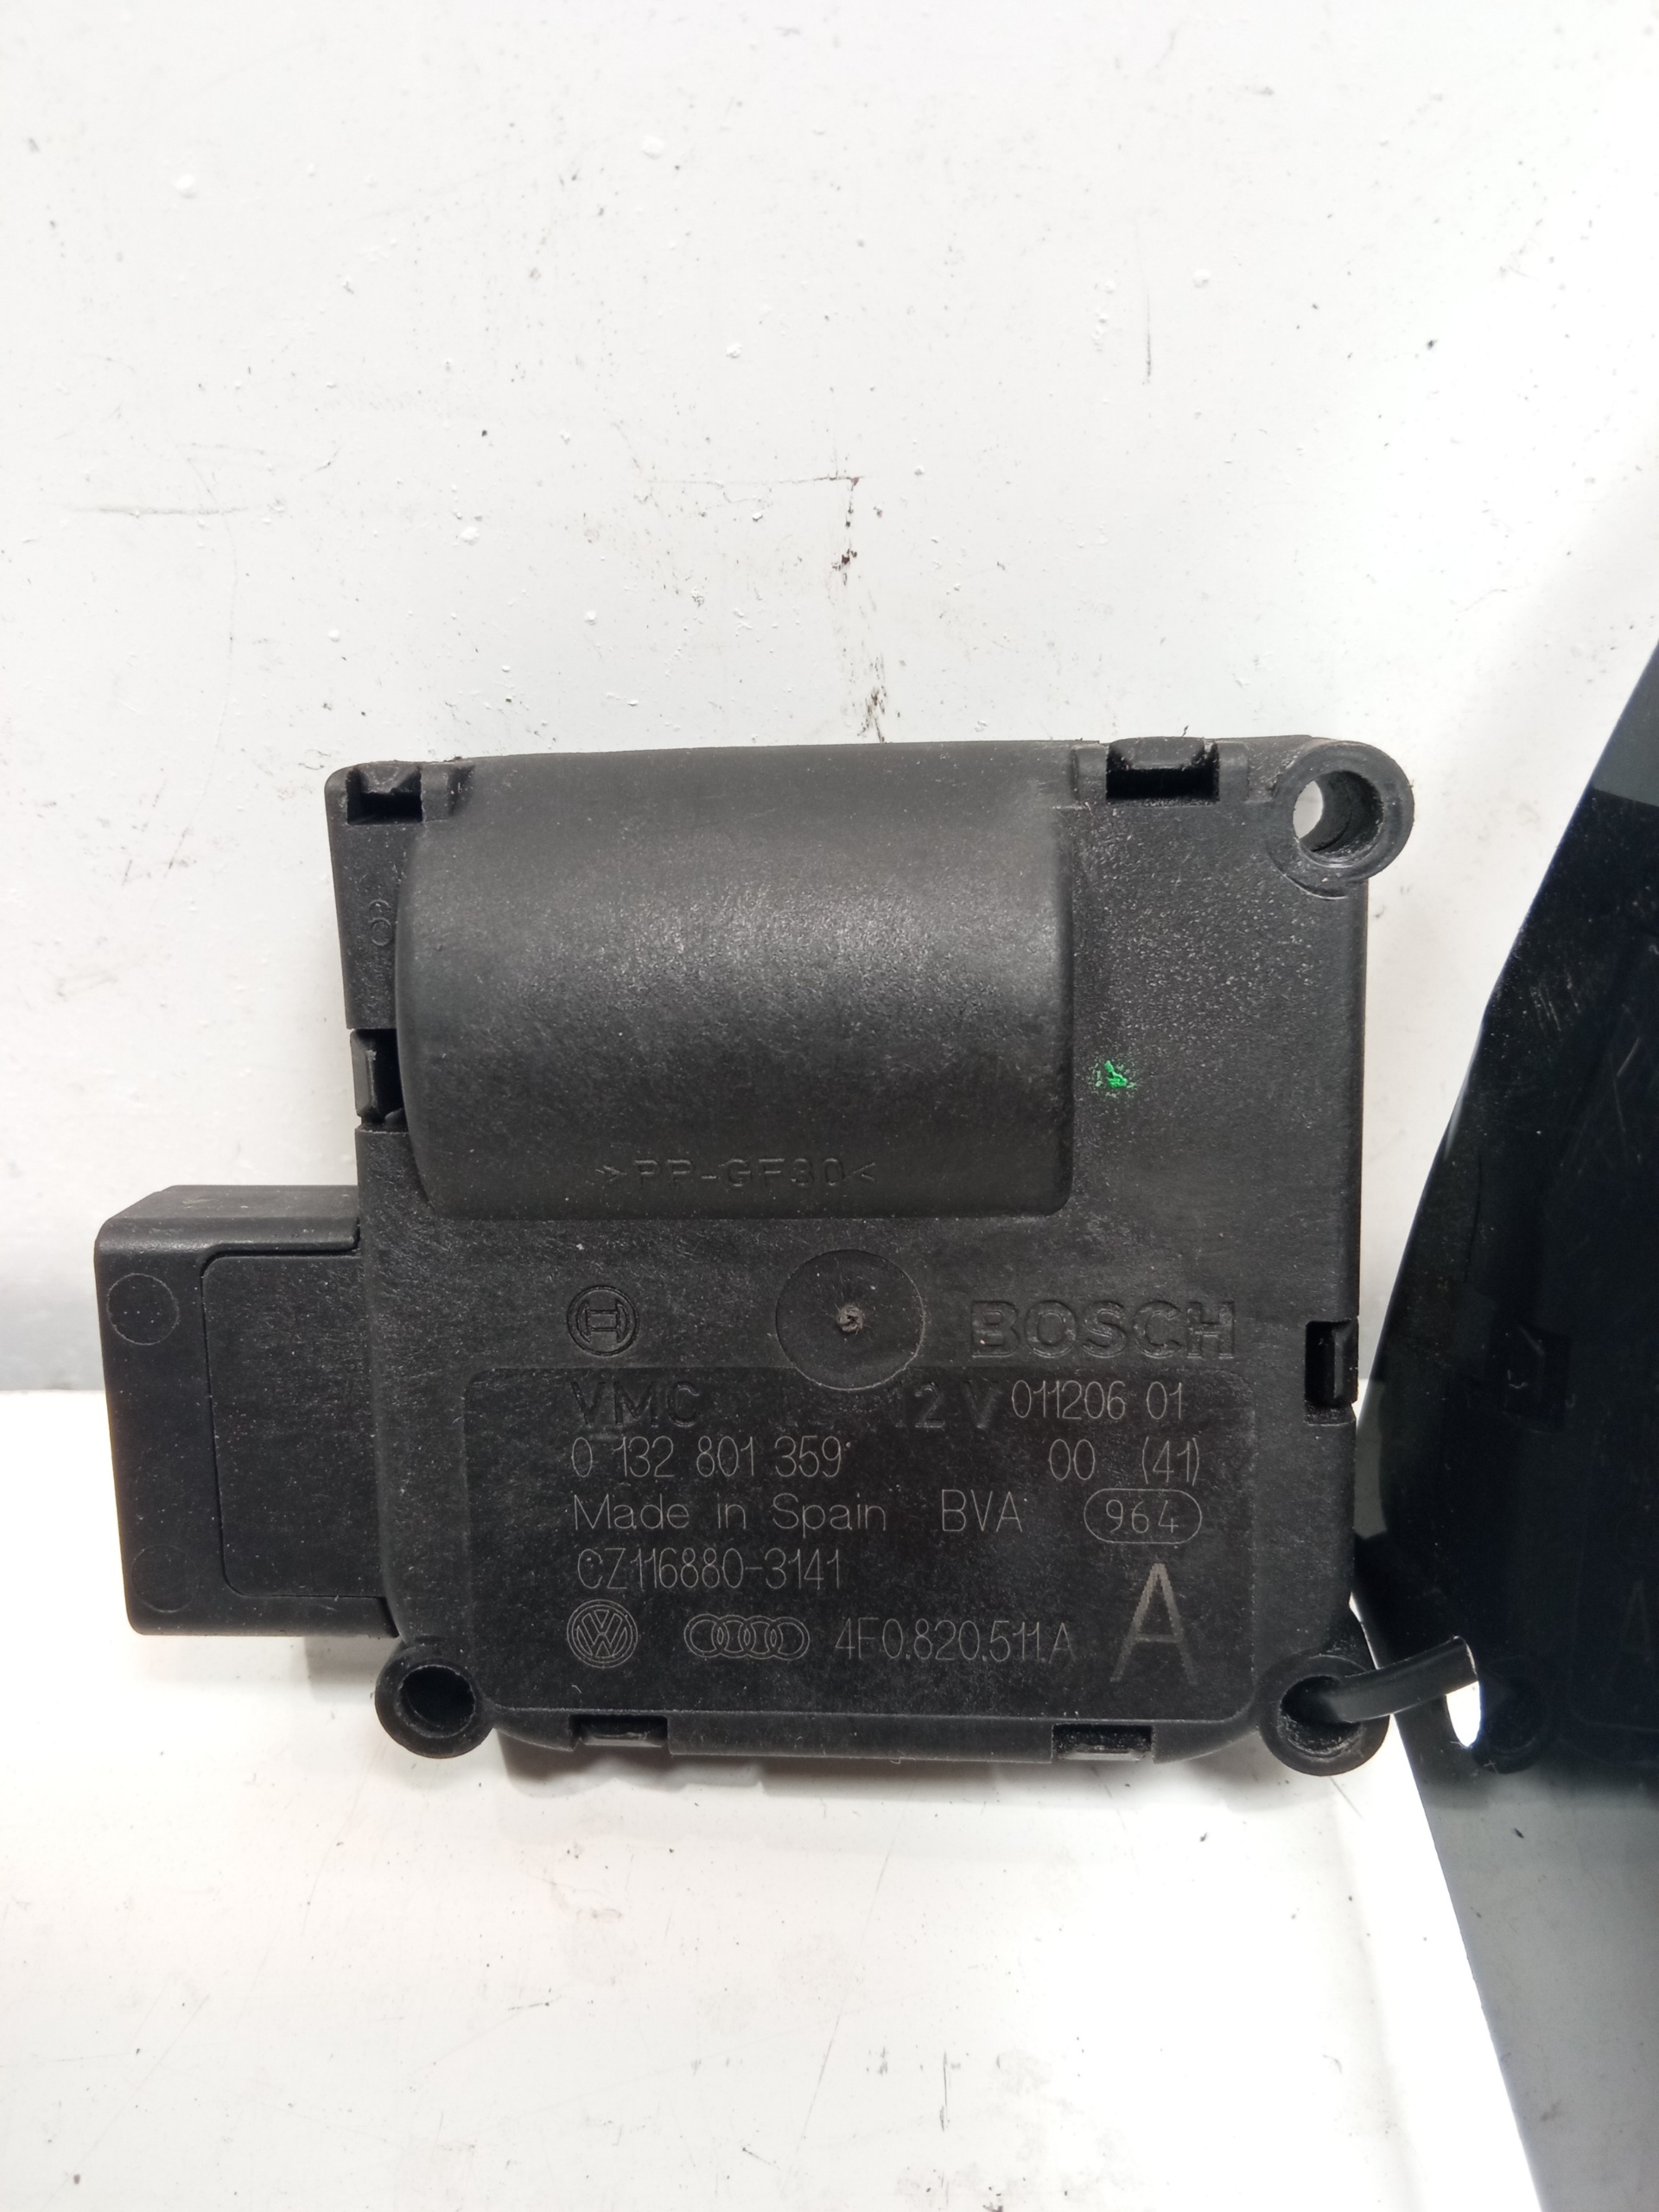 AUDI A6 C6/4F (2004-2011) Air Conditioner Air Flow Valve Motor 4F0820511A, 5PINES 24959196